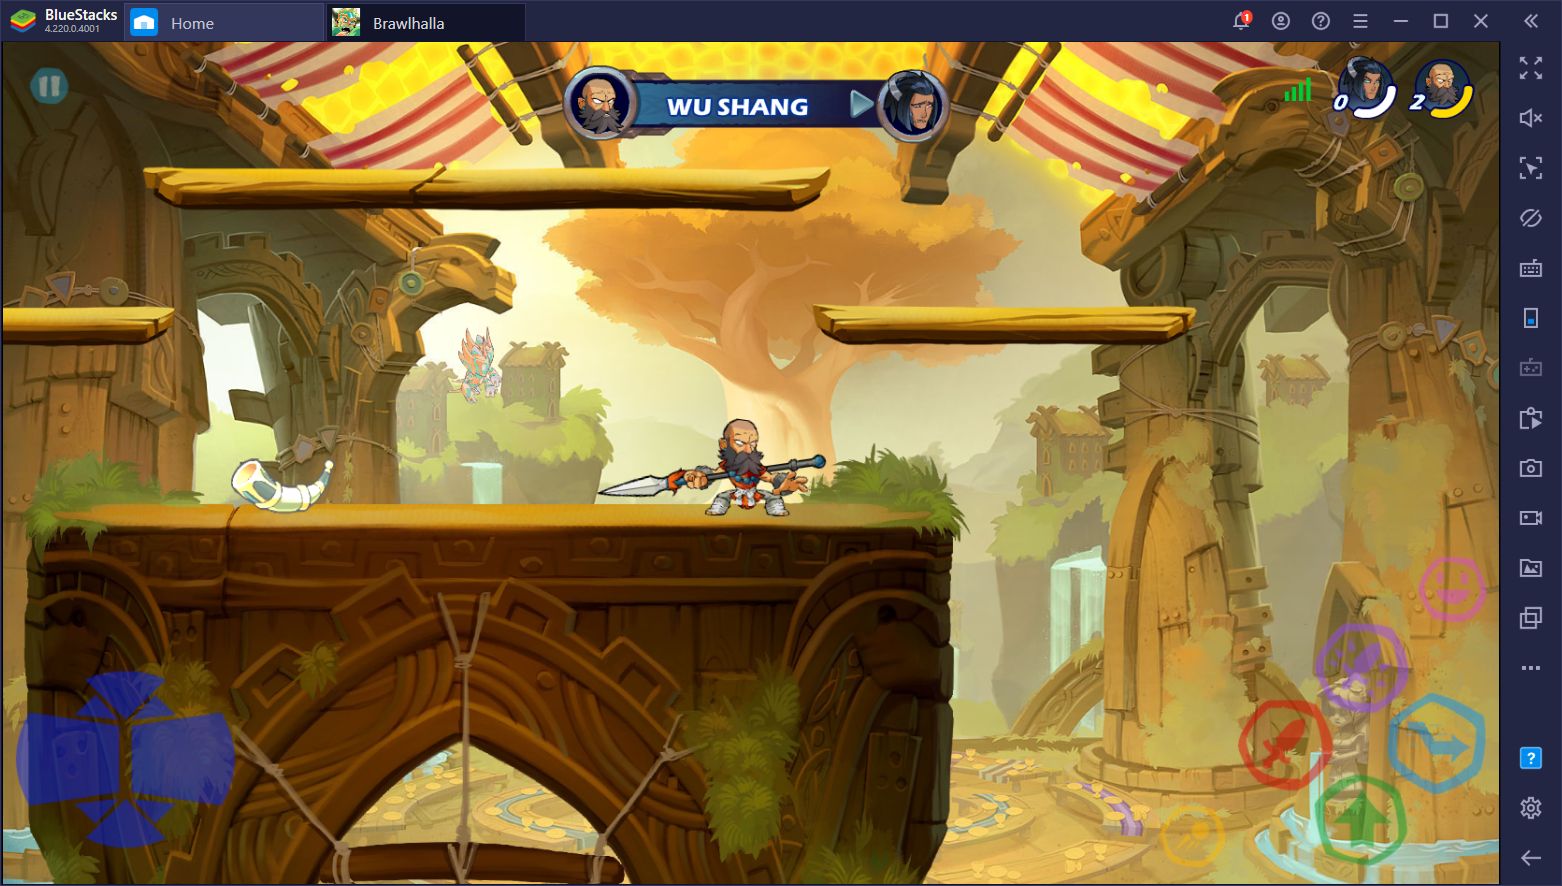 Brawlhalla on BlueStacks – Our First Impressions of the New Mobile Version